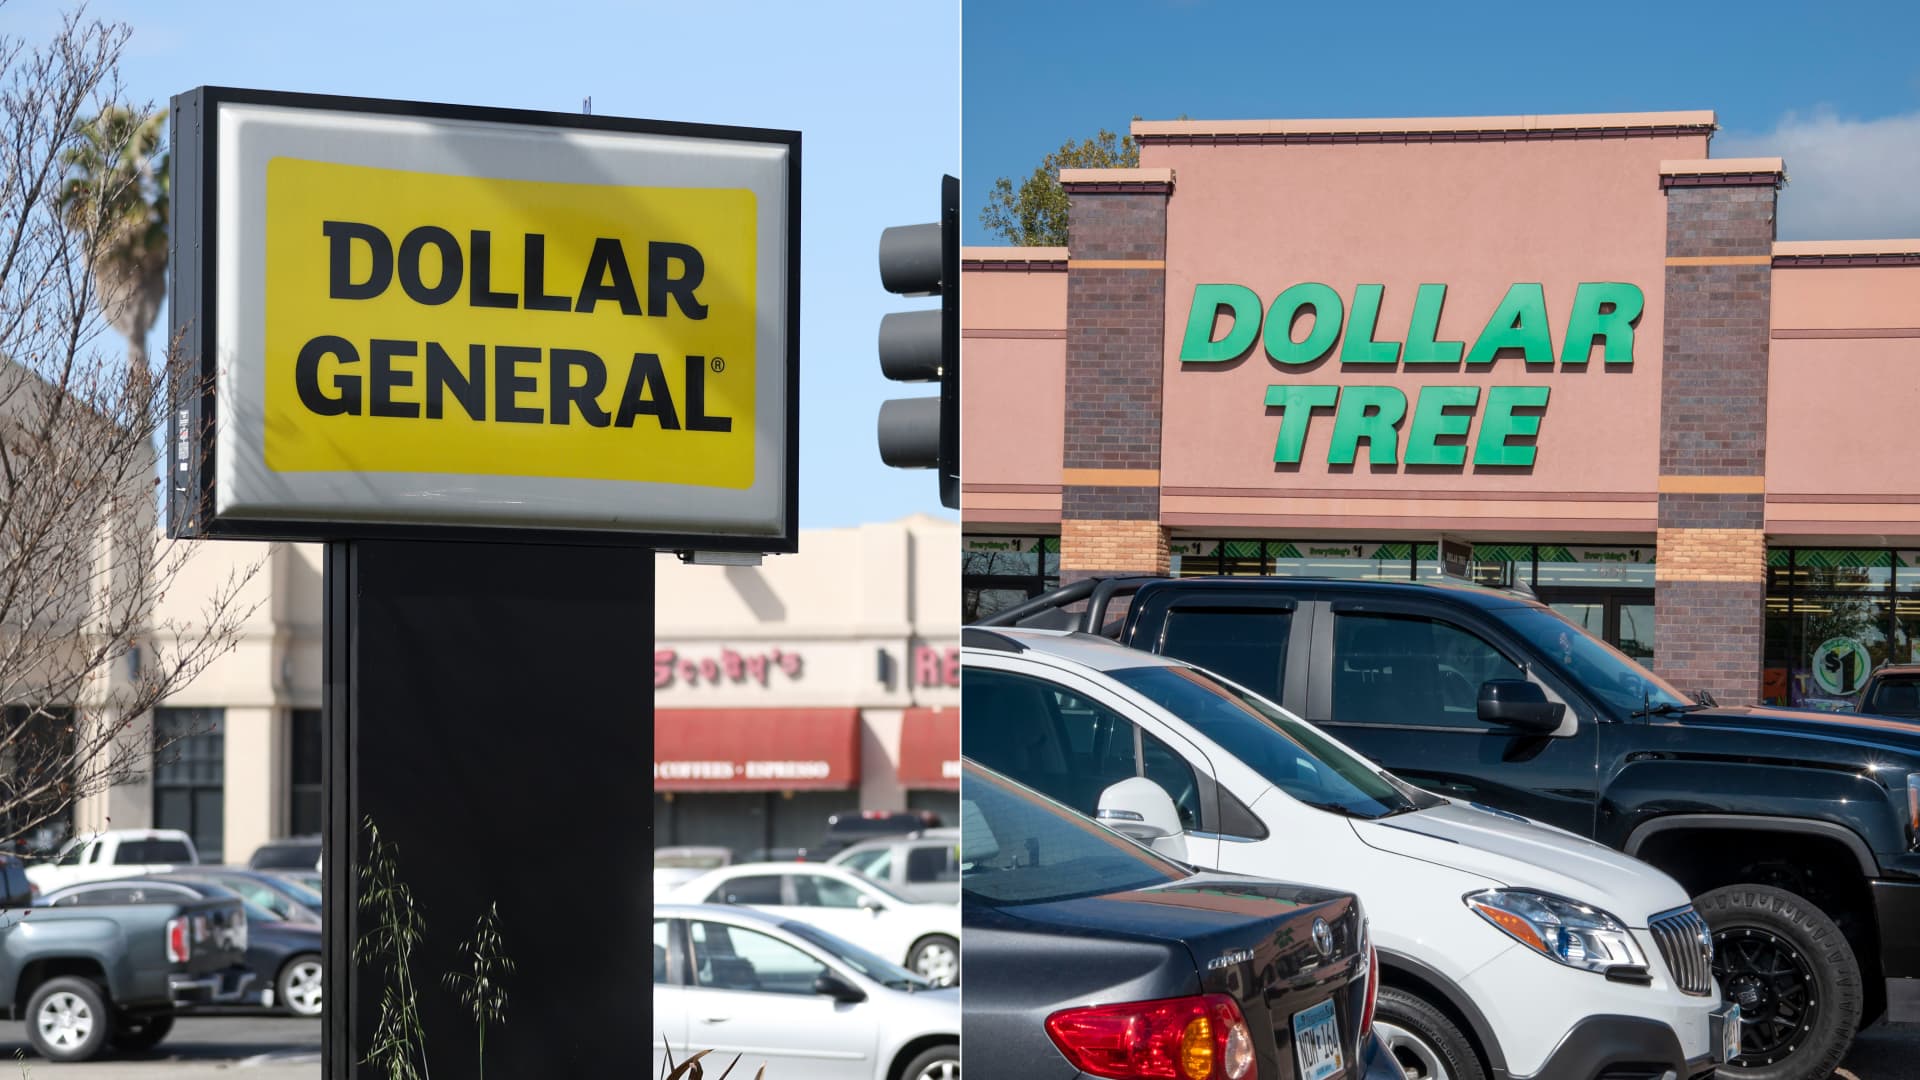 Shares of Dollar Tree fall after company cuts guidance citing investments in competitive pricing – CNBC